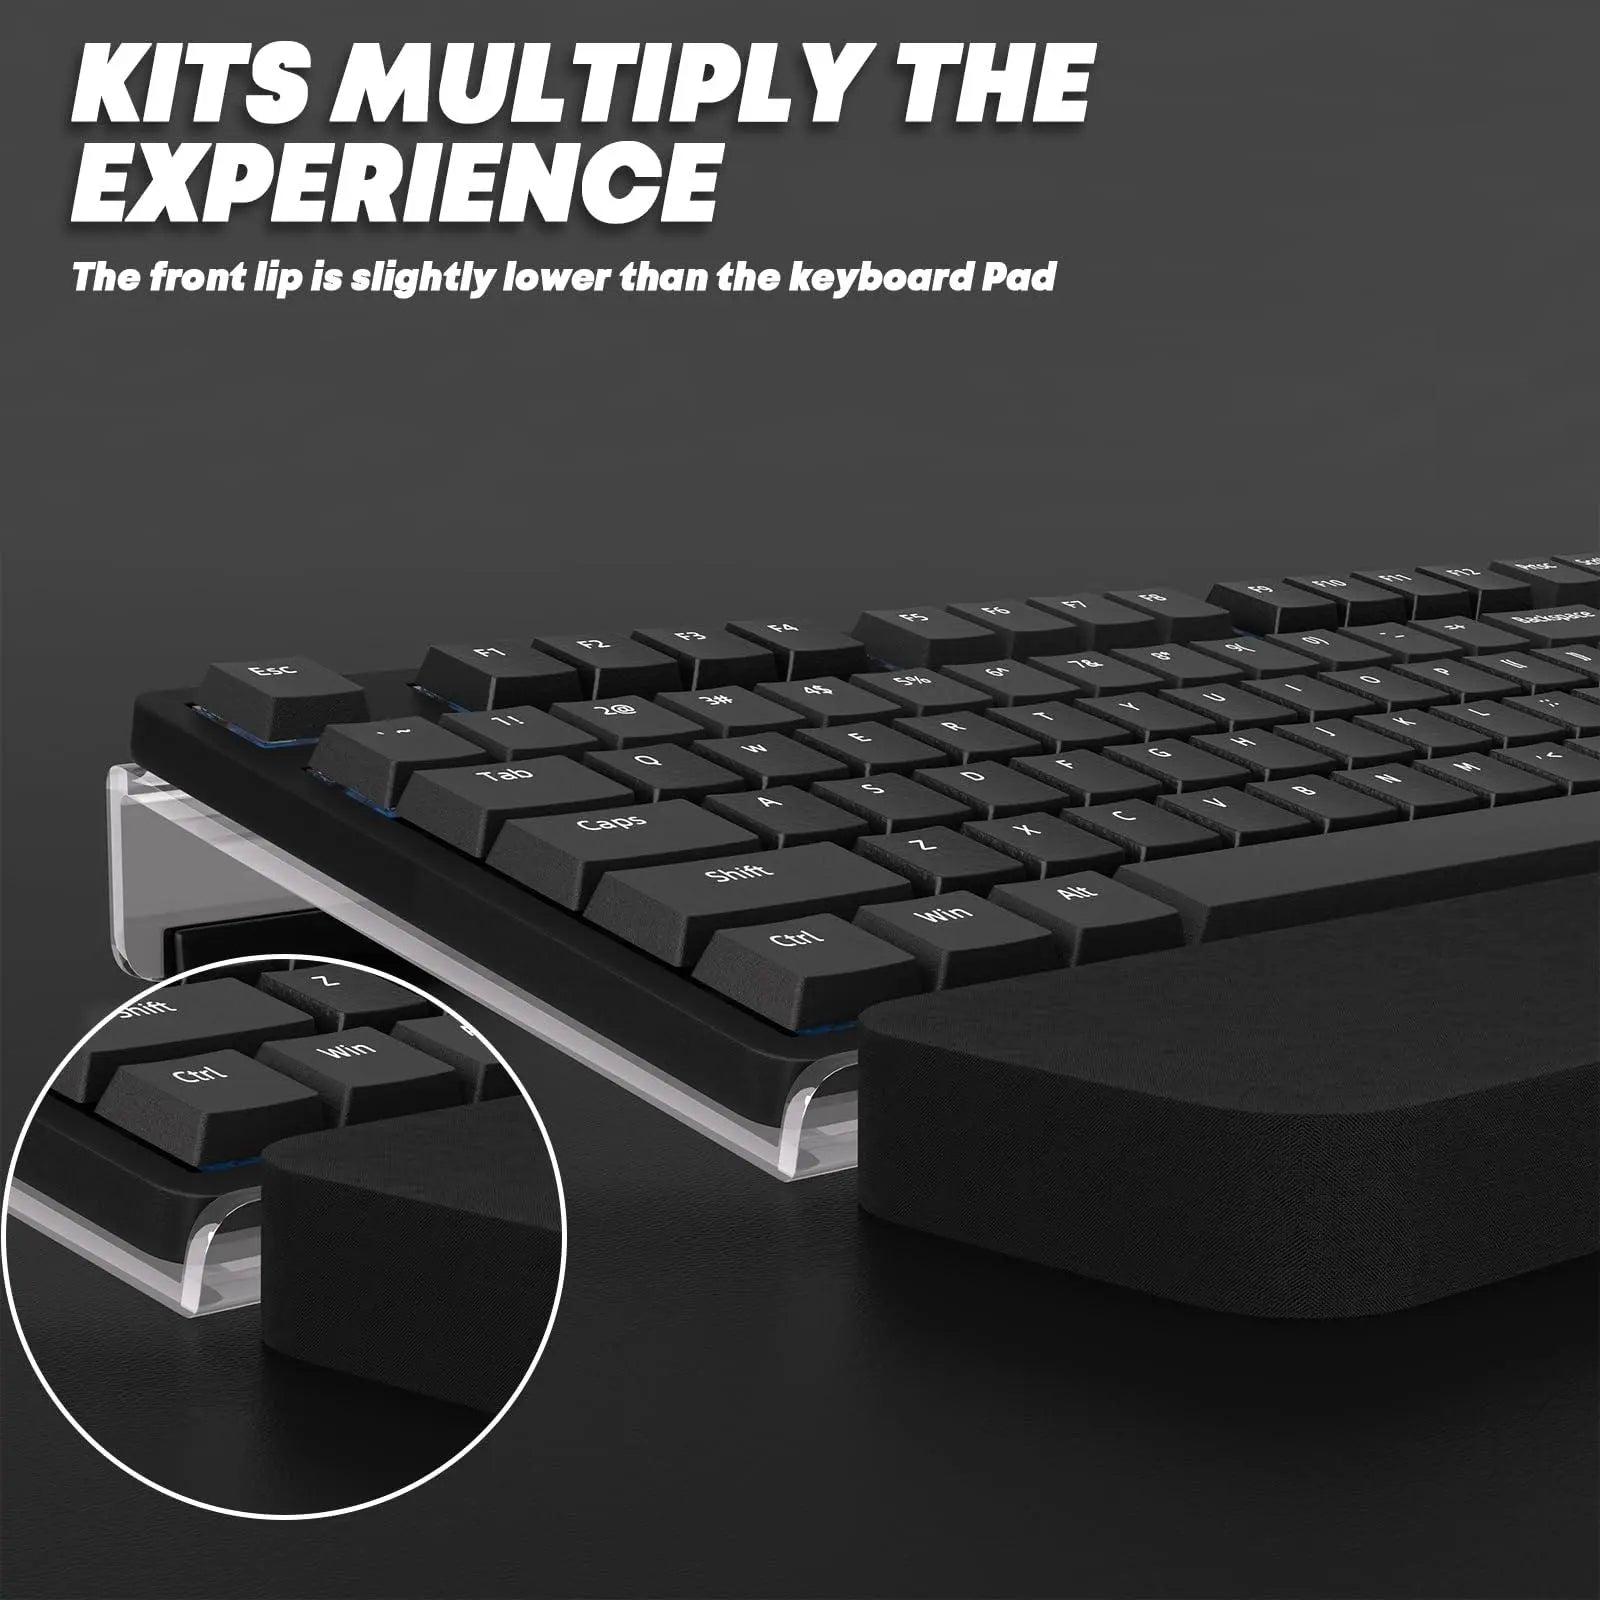 PUTORSEN  Computer Keyboard Stand Acrylic,Tilted Keyboard Tray with Keyboard Wrist Rest for Better Ergonomic Typing,Keyboard Riser with Anti-Slip Fits Most Keyboards for Office Desk, Home,School PUTORSEN